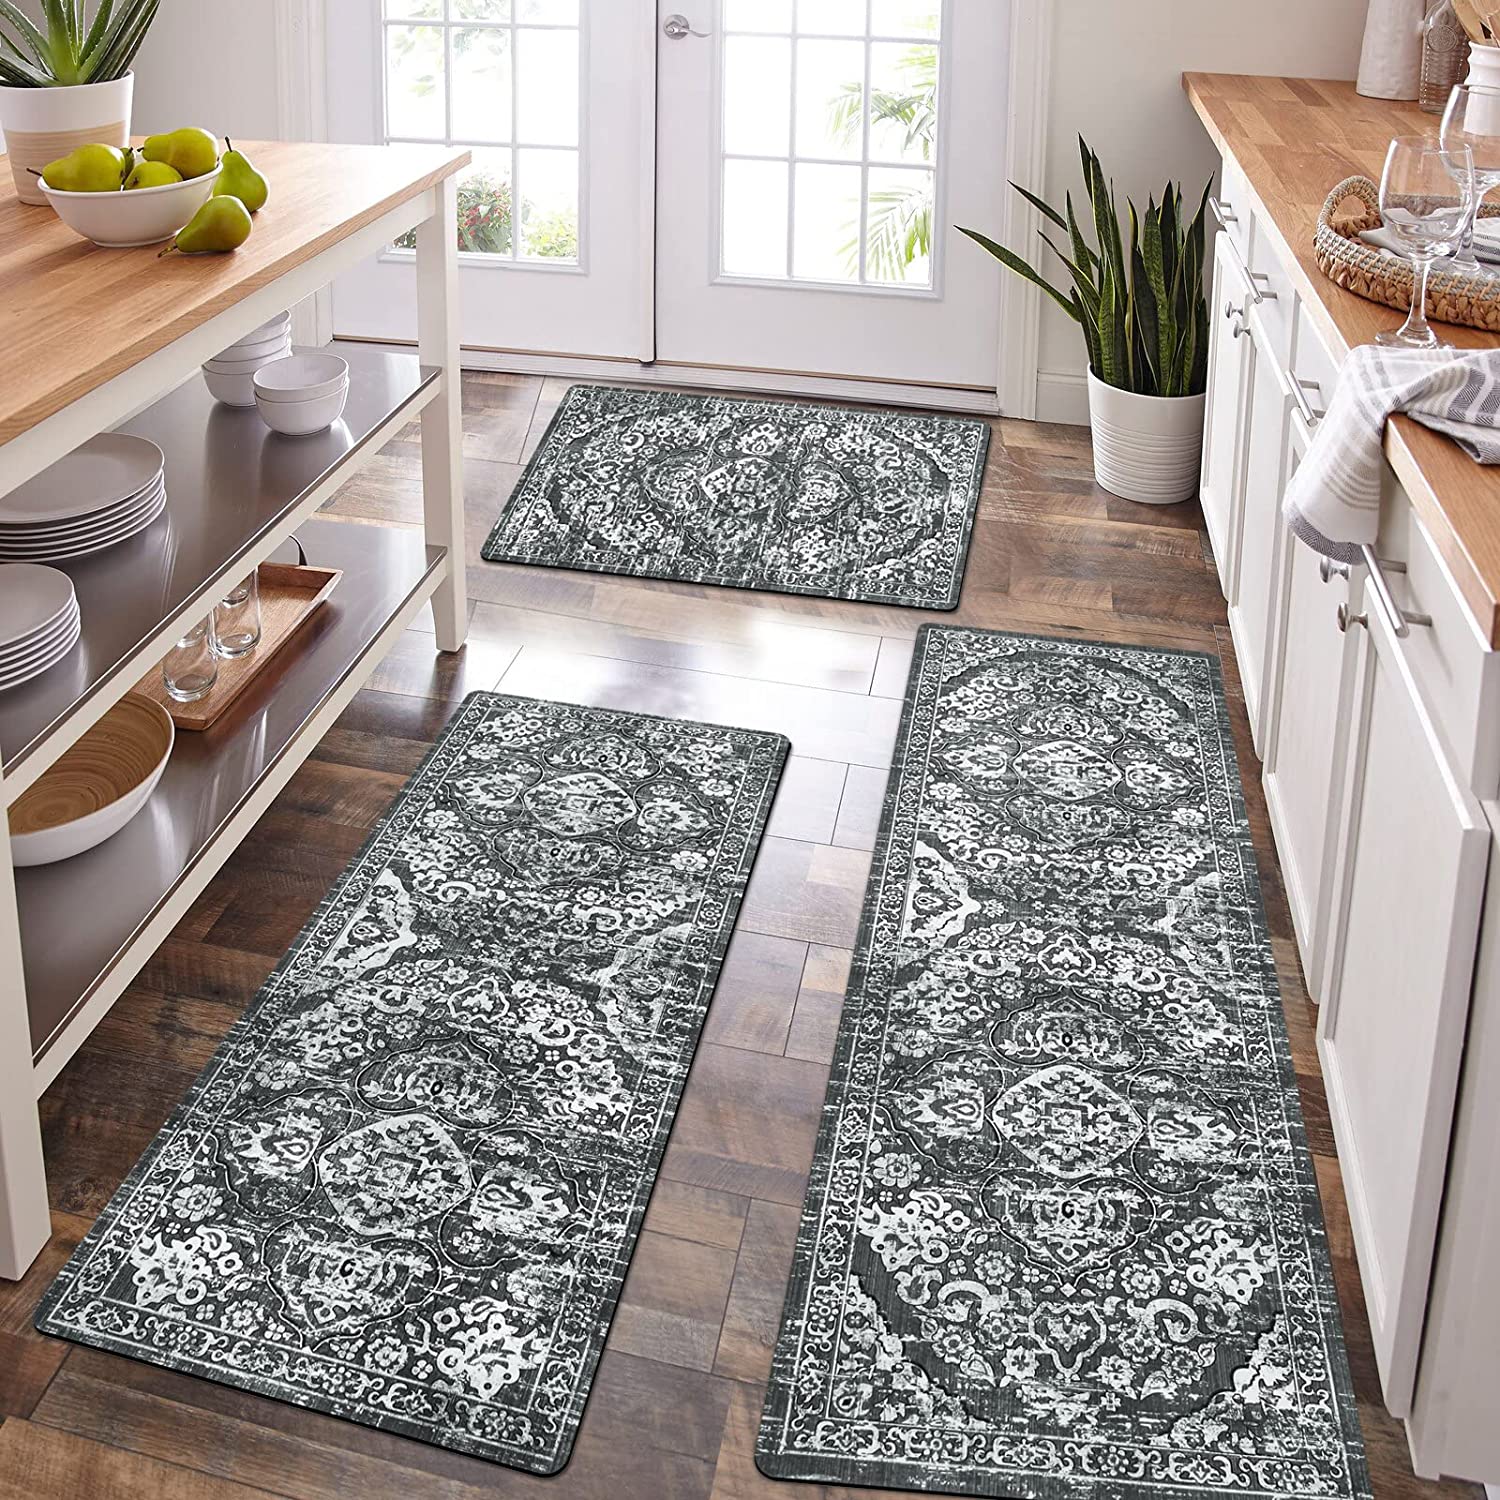 3 Pcs Kitchen Rug Set Non Skid Thick Black Kitchen Rugs and Mats Stain  Resistant